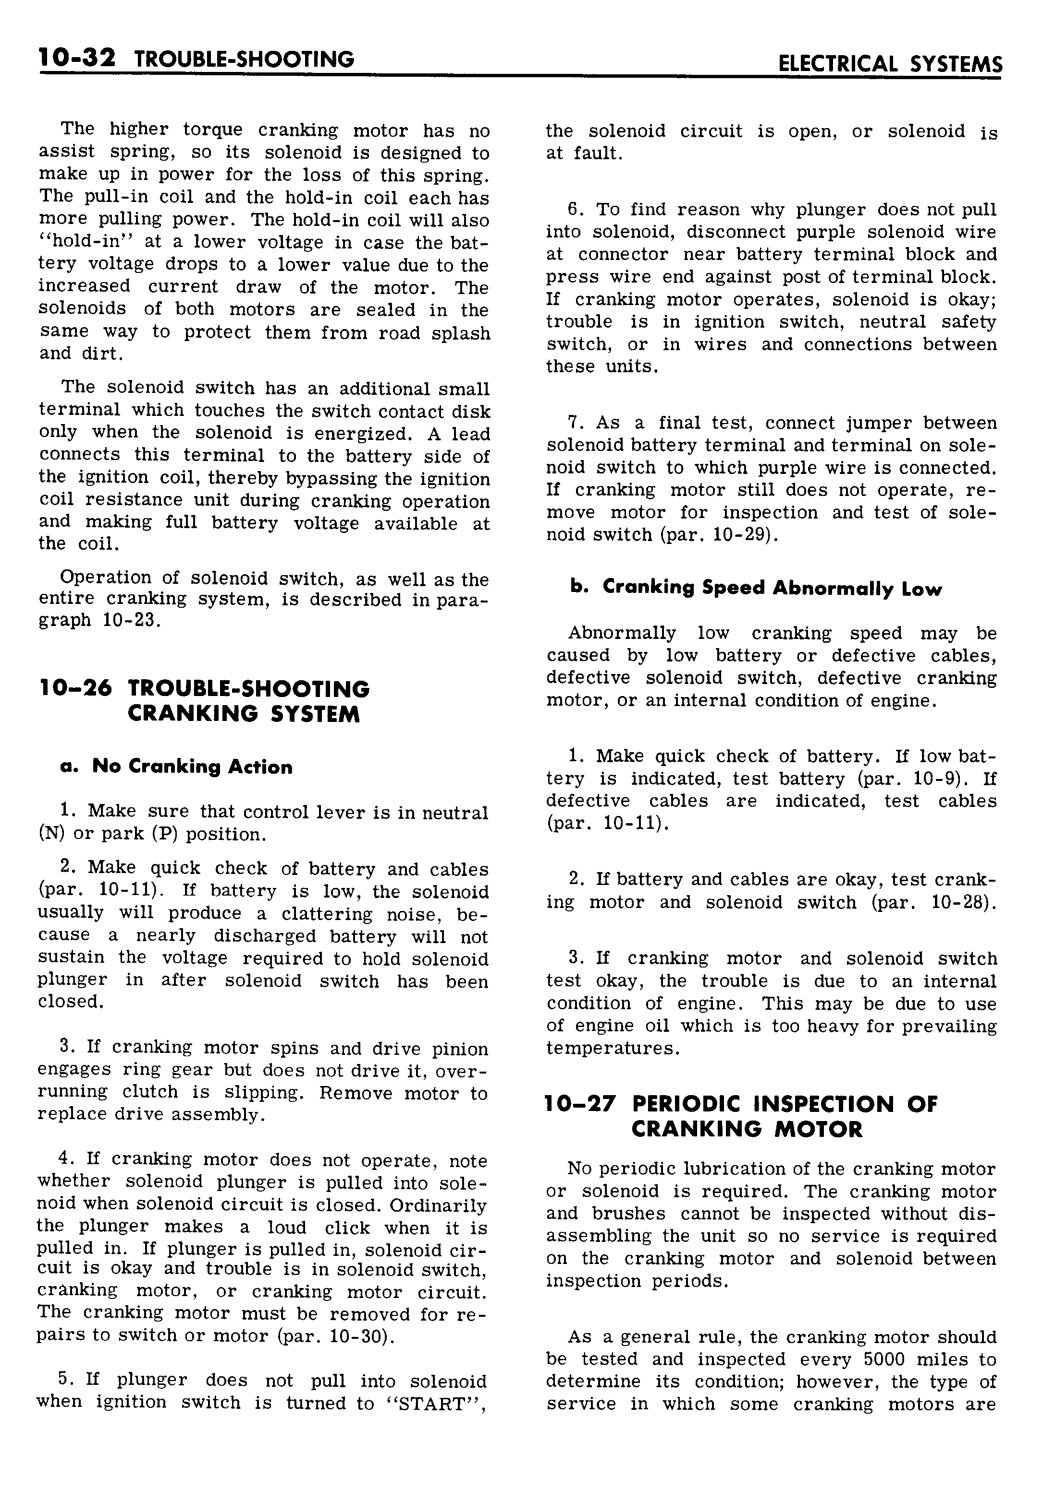 n_10 1961 Buick Shop Manual - Electrical Systems-032-032.jpg